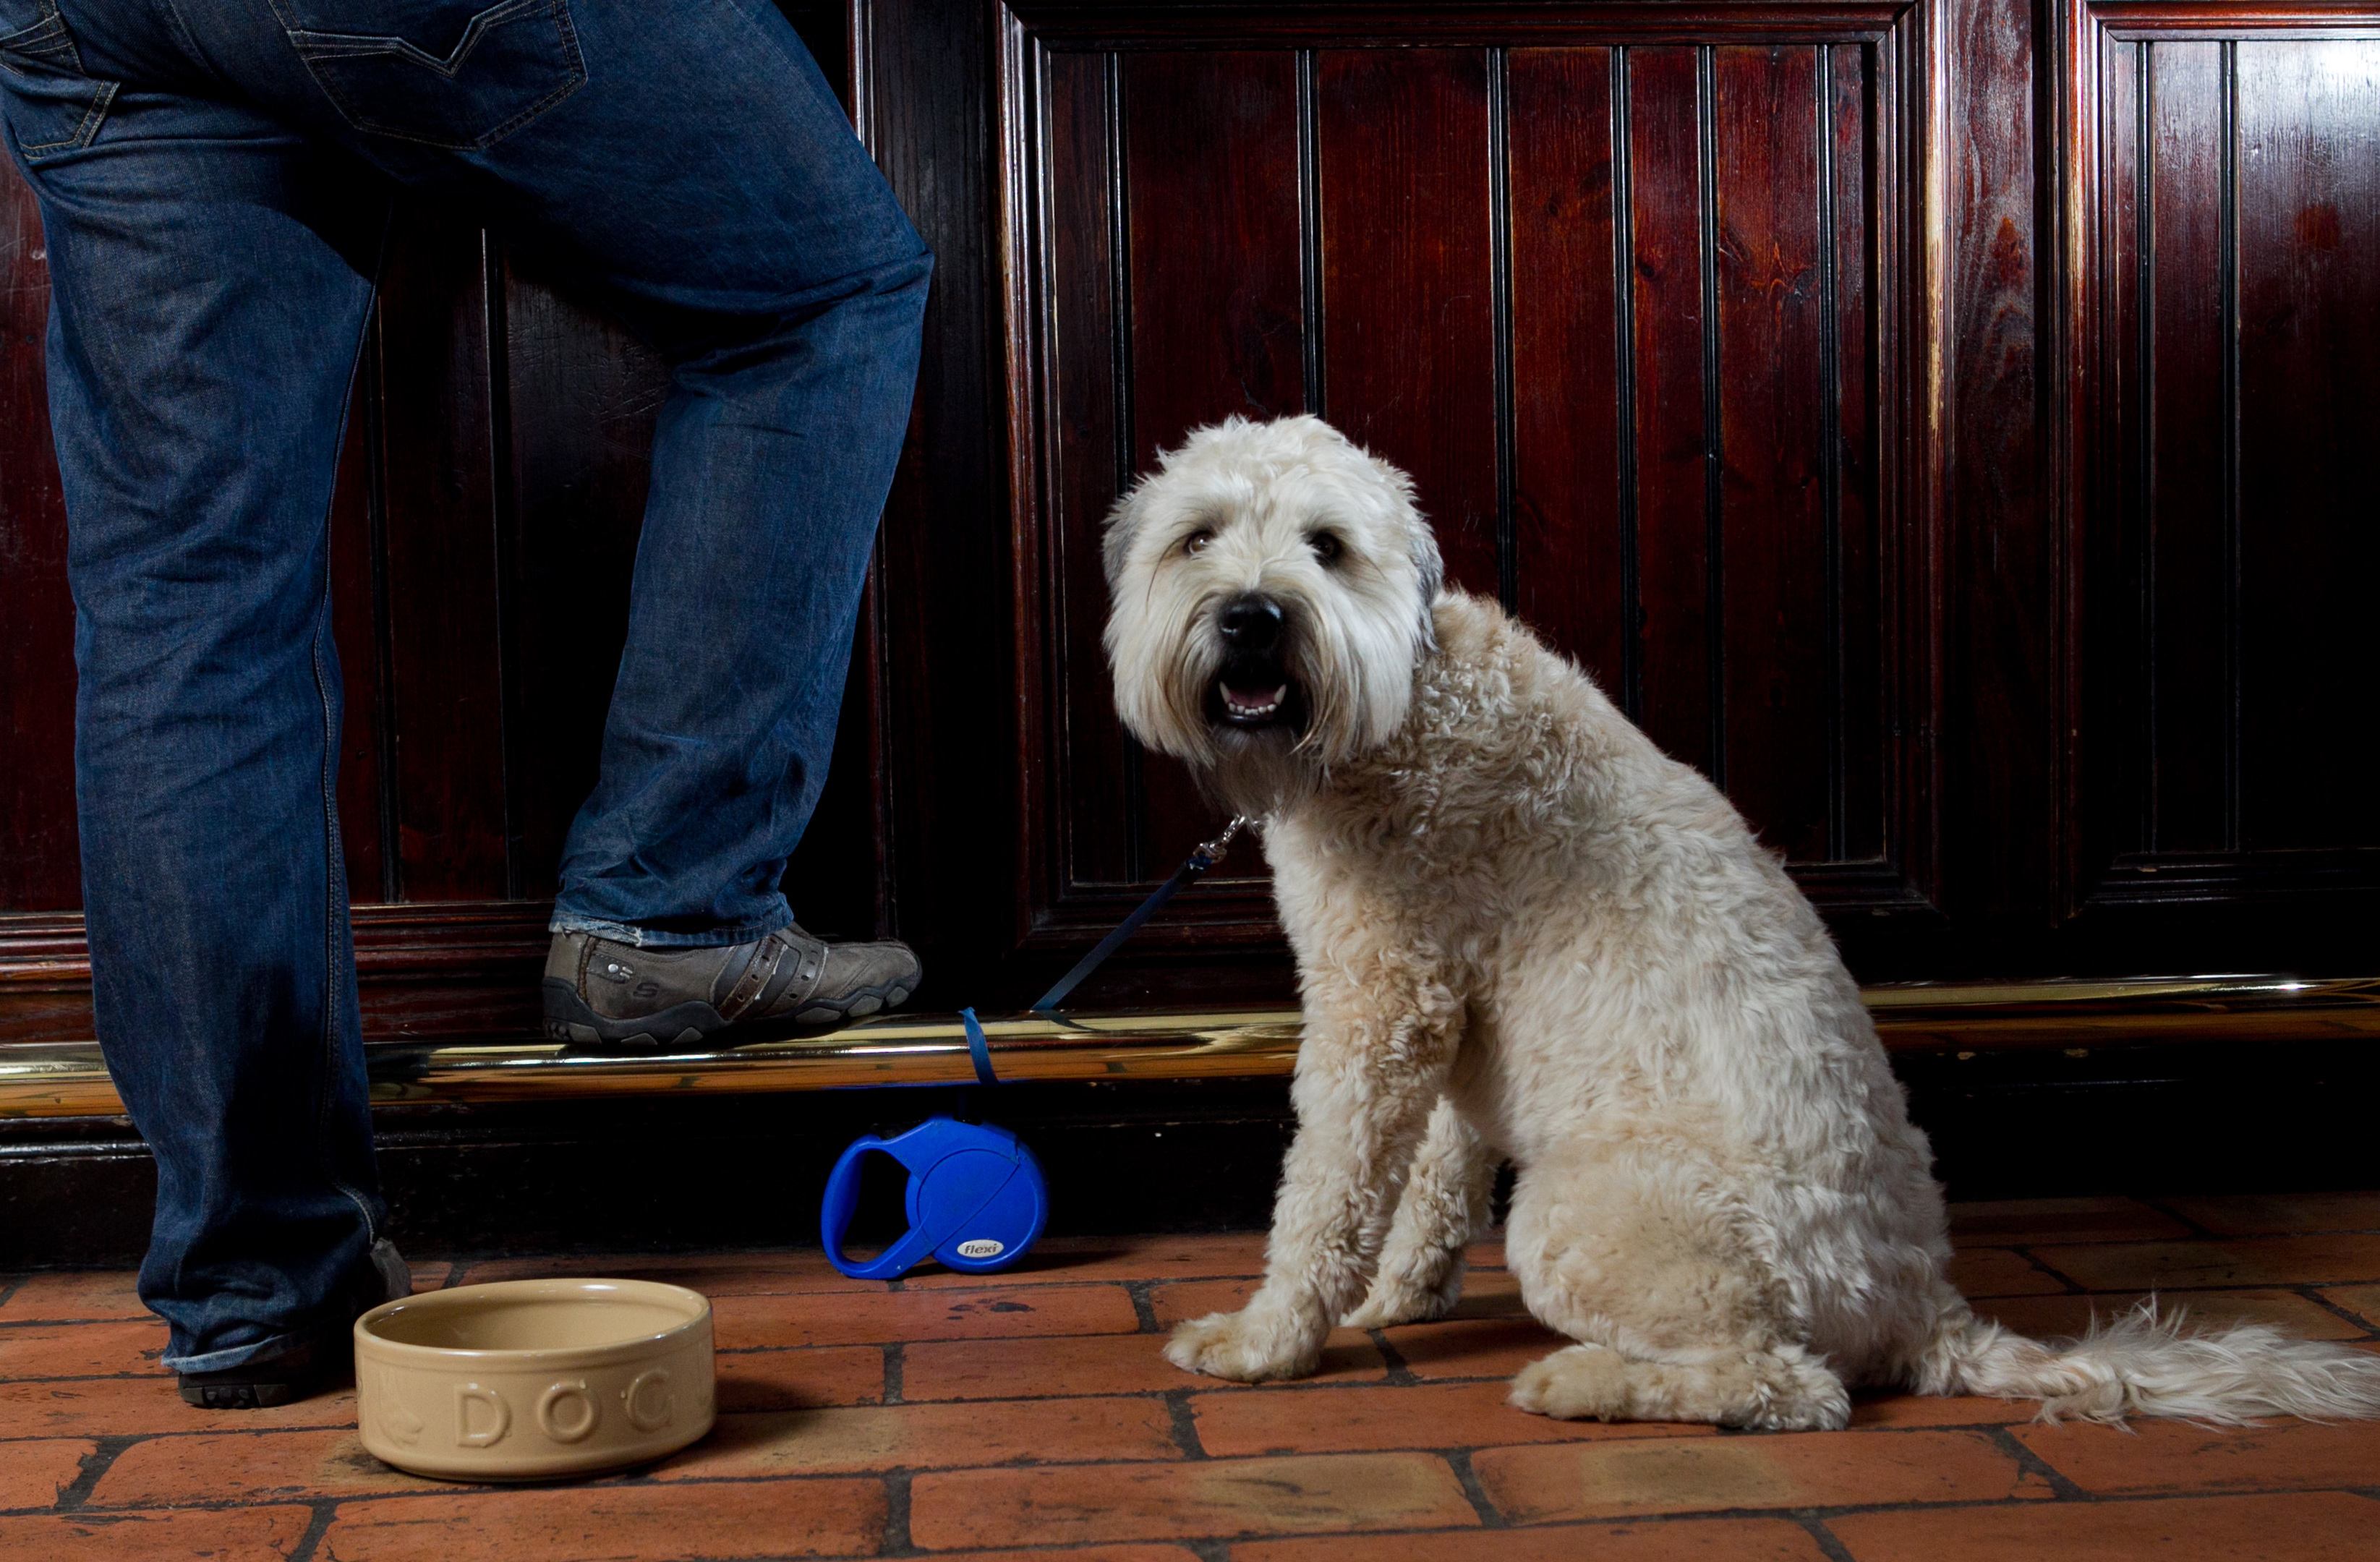 There's no need to leave your dog at home if you pick the right pub.